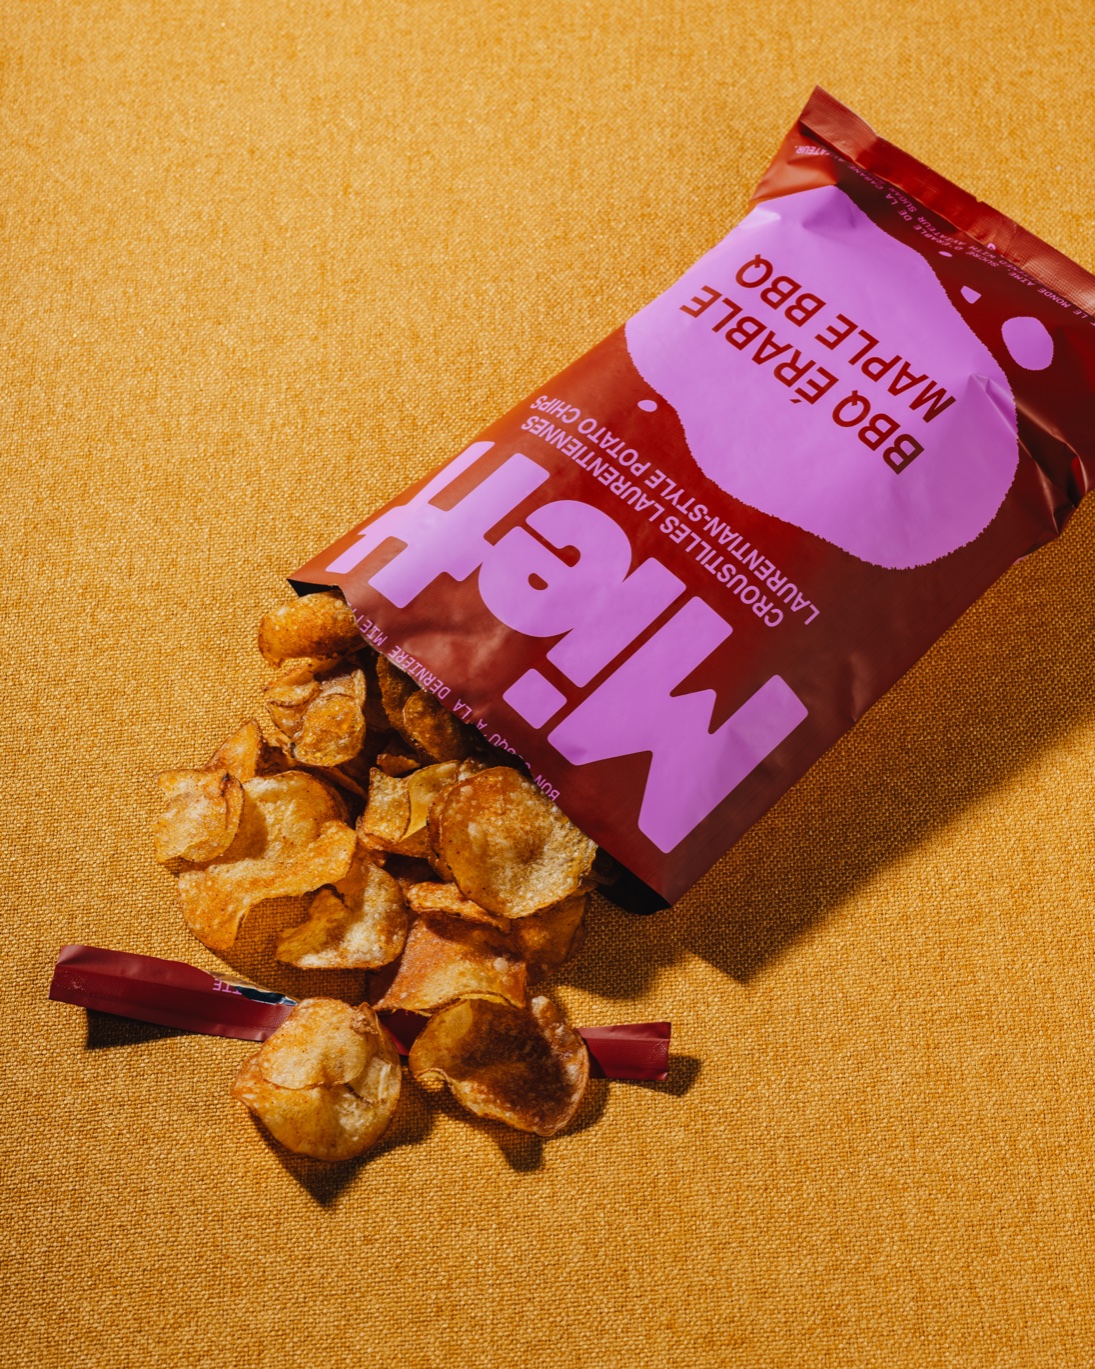 Transforming Chip Packaging As We Know It With Miett’s Playfully Casual Design